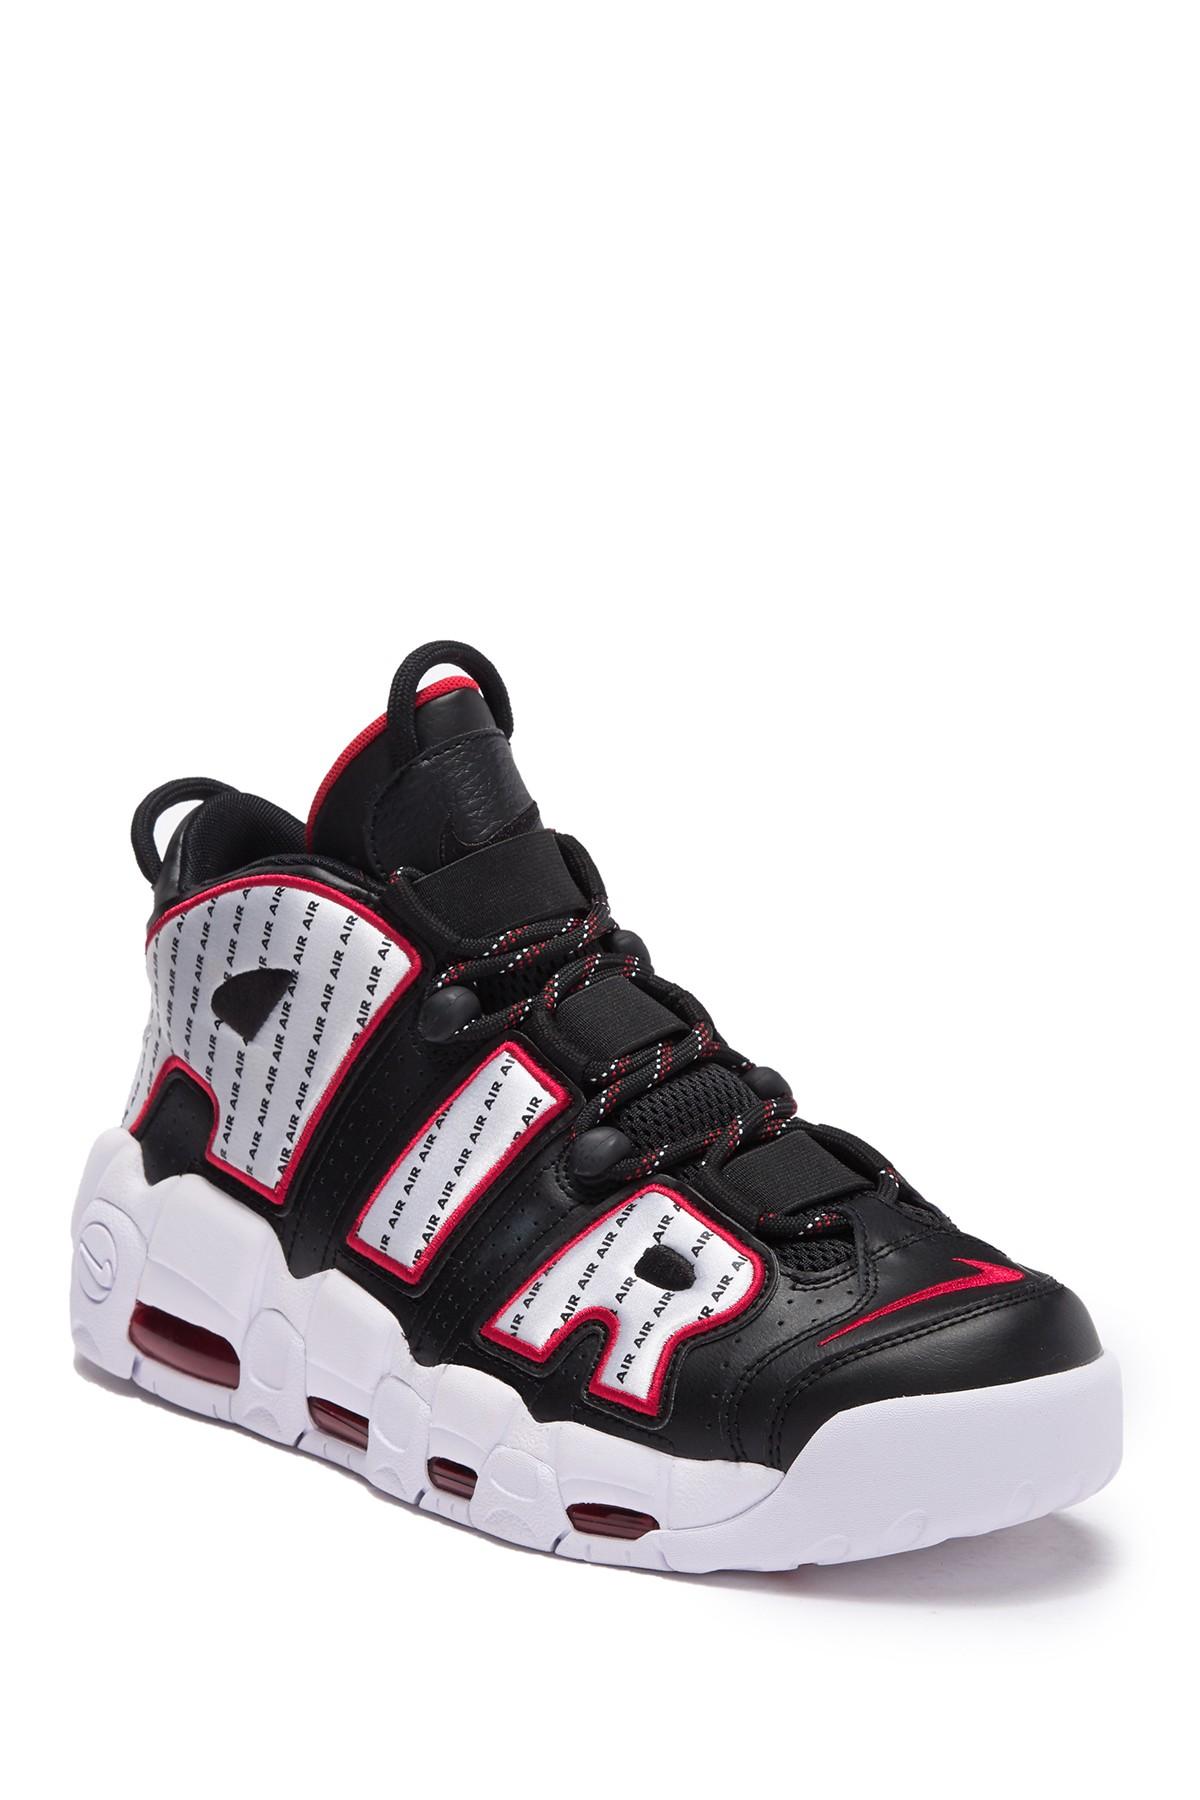 Nike Air More Uptempo '96 - Size 15 in Black/White-University Red 